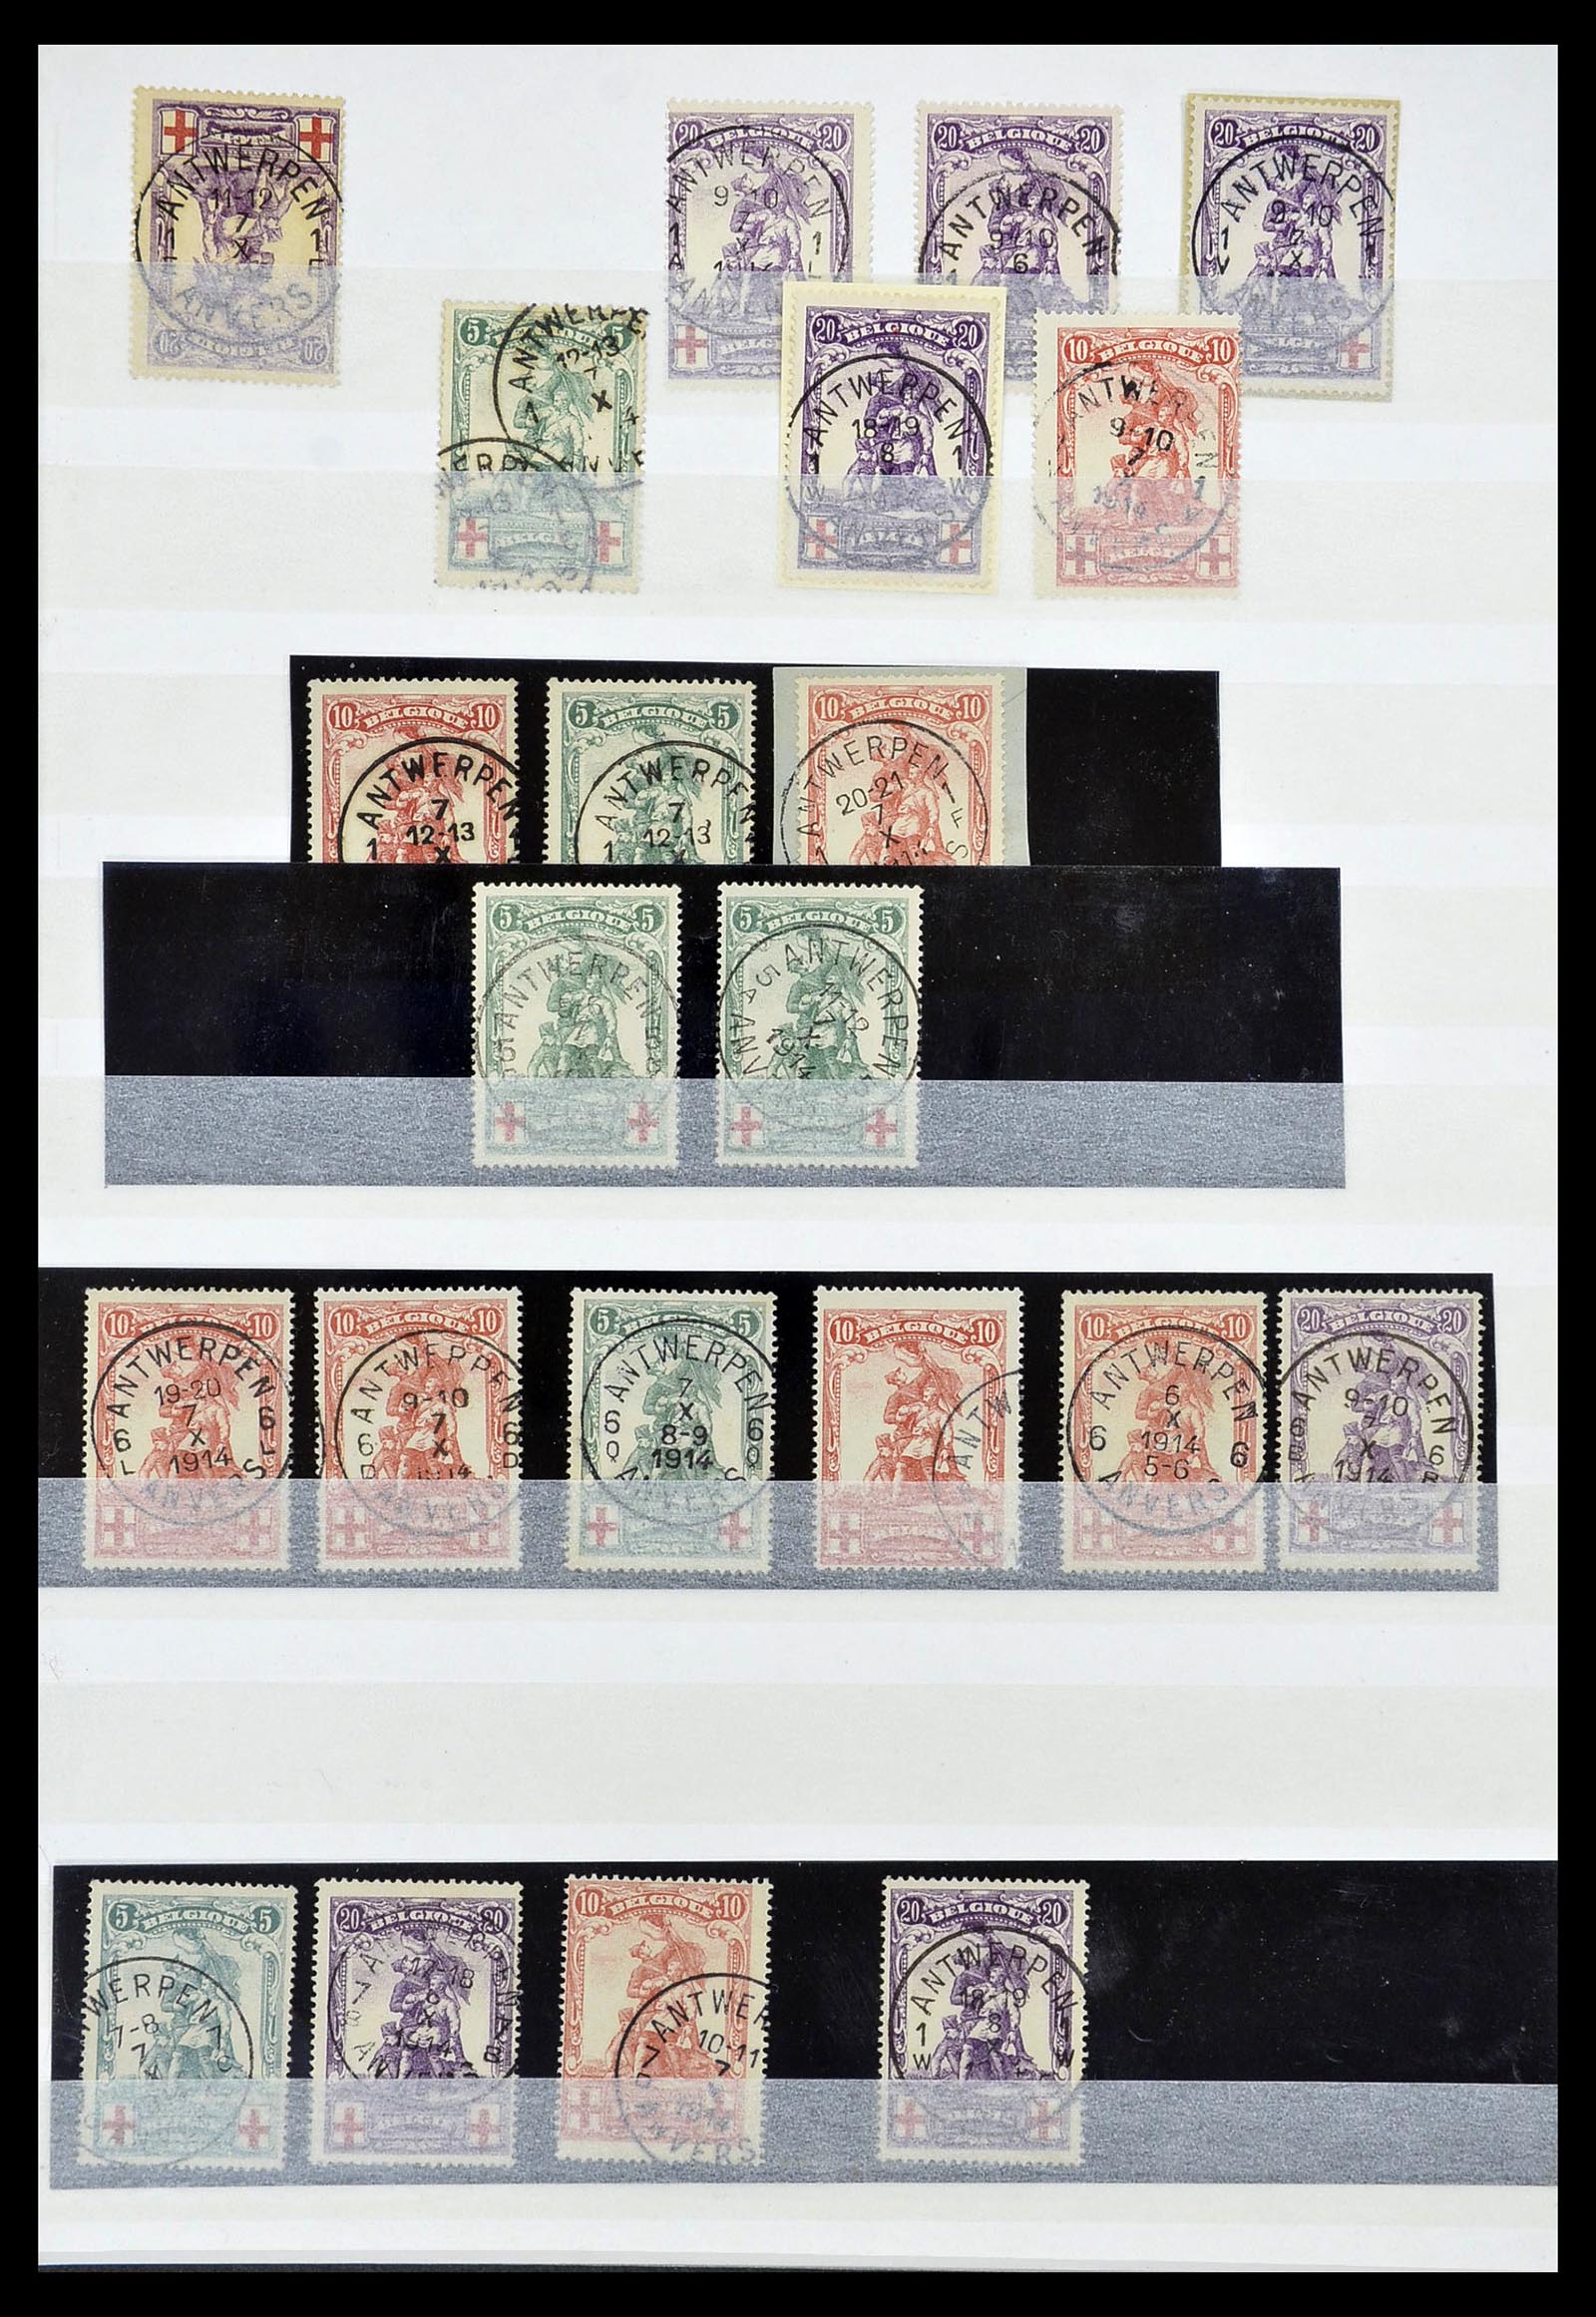 34632 038 - Stamp Collection 34632 Belgium cancels 1914-1915.